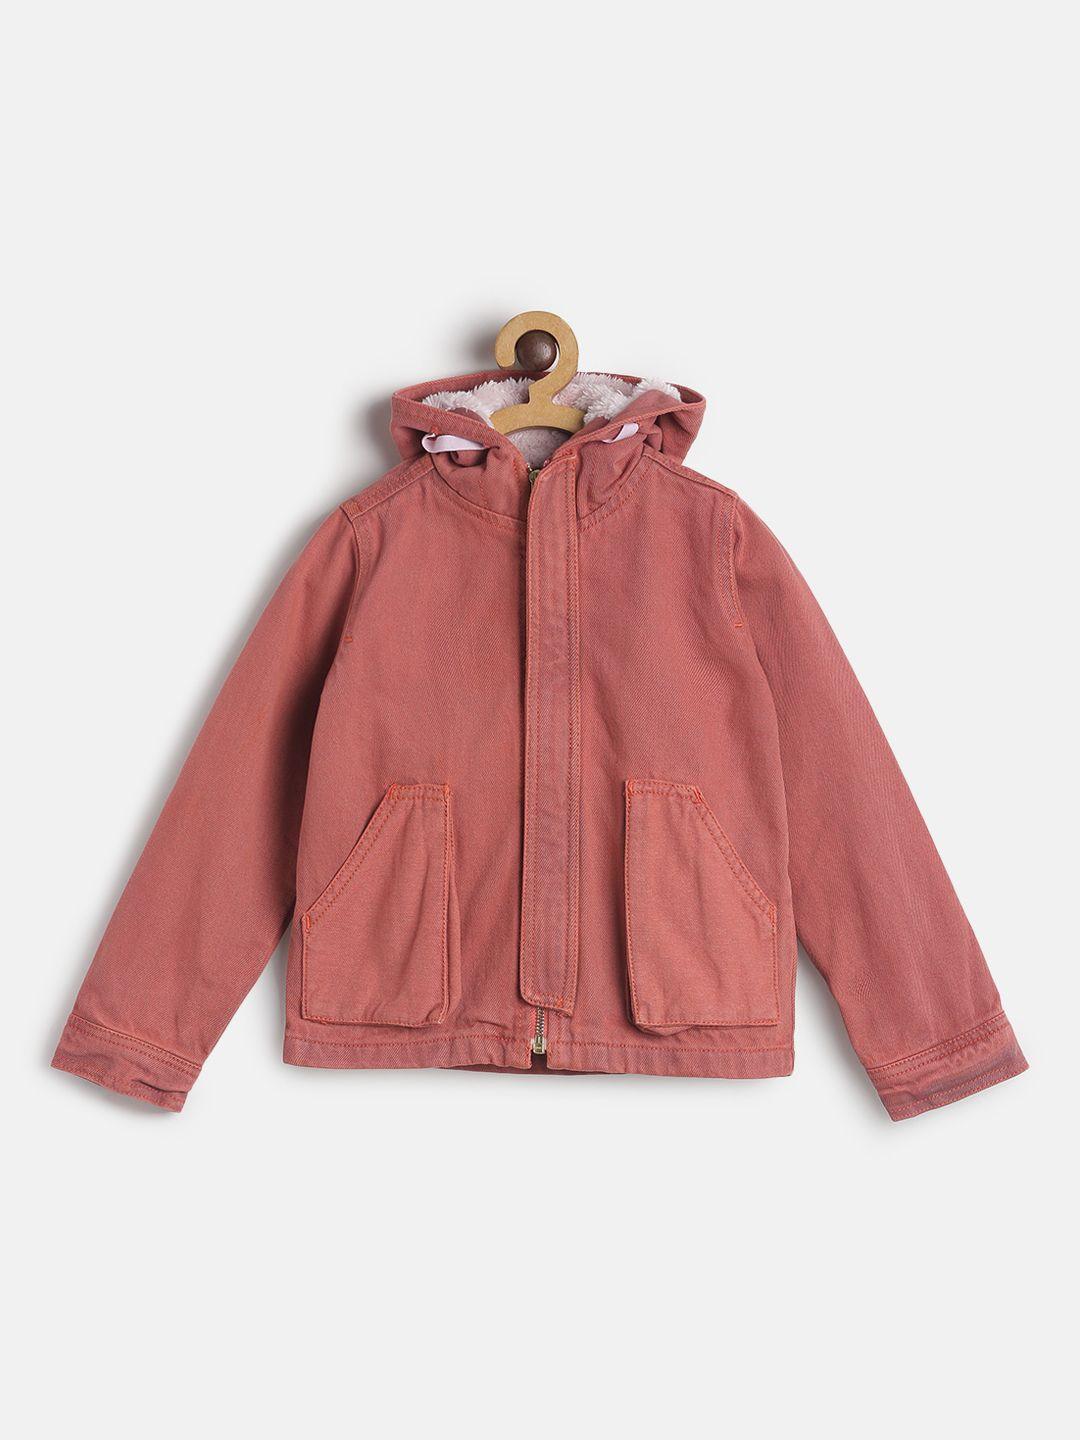 tales & stories boys red solid bomber jacket